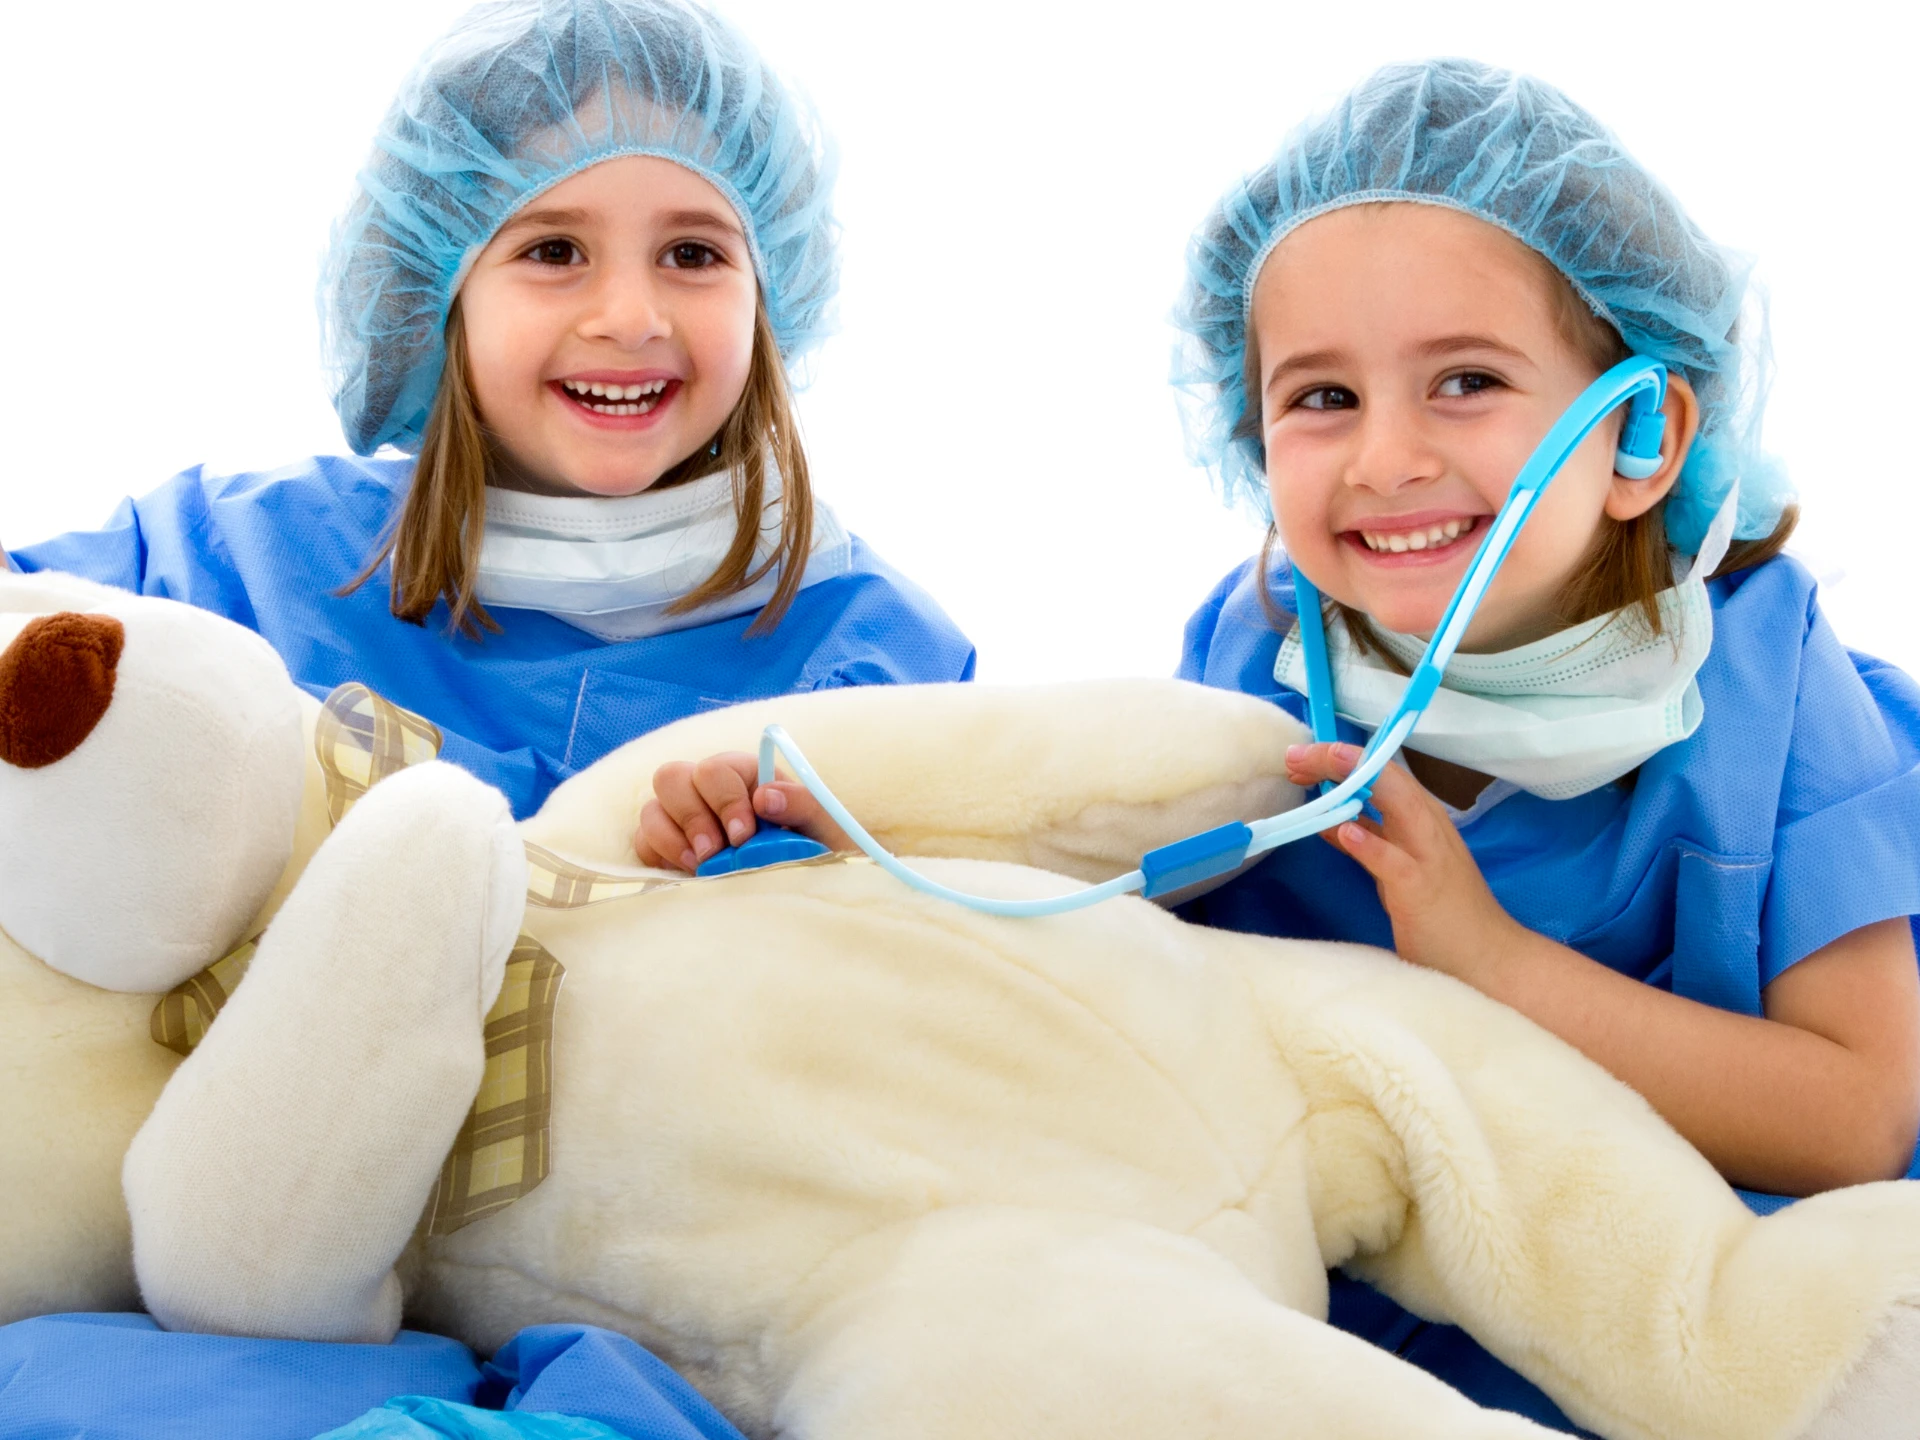 peadiatric first aid course kids dressed as doctors with teddy